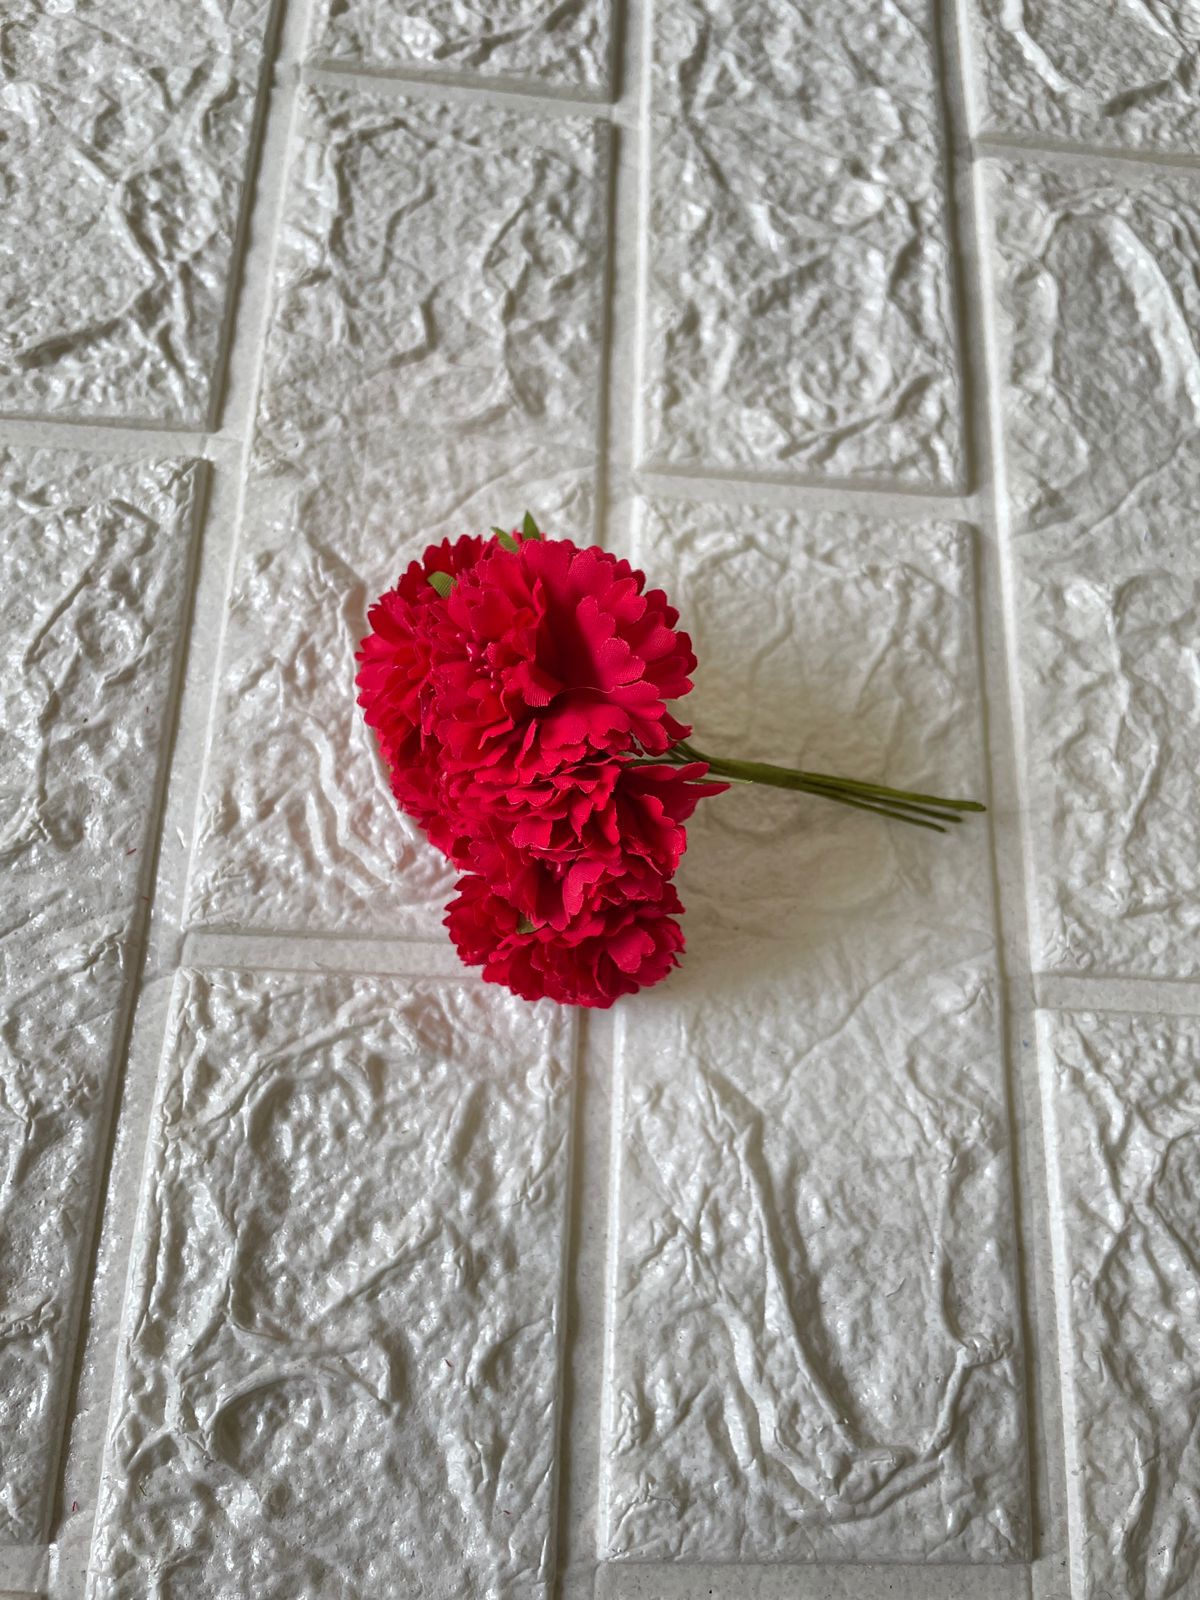 Artificial flower for decoration - Red